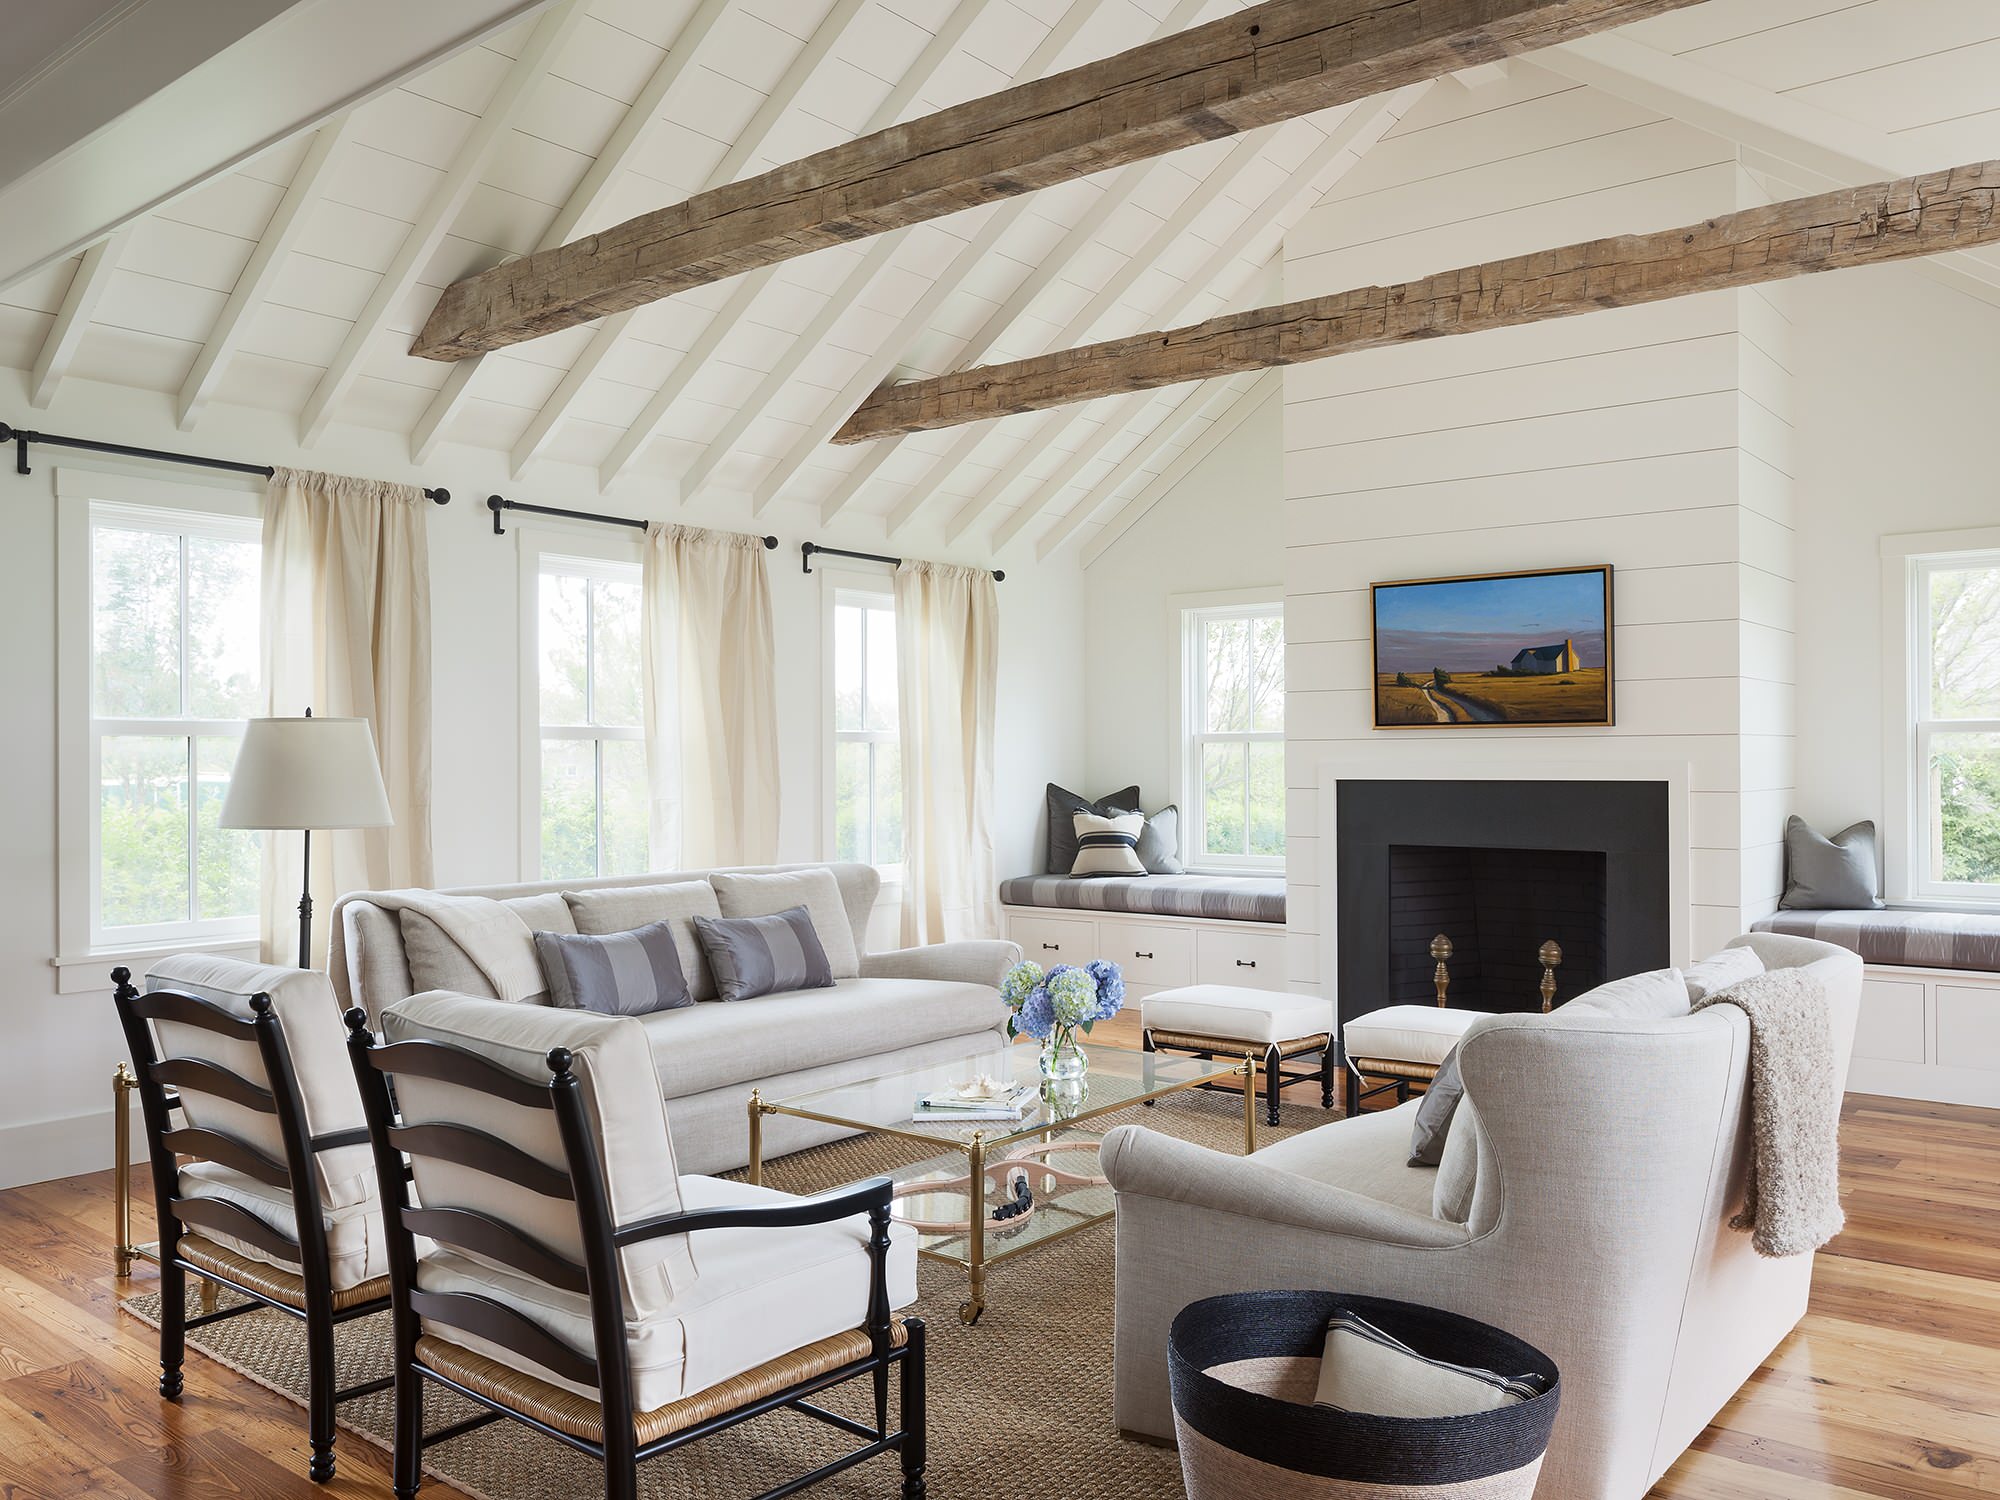 Comfort and functionality (from Houzz)